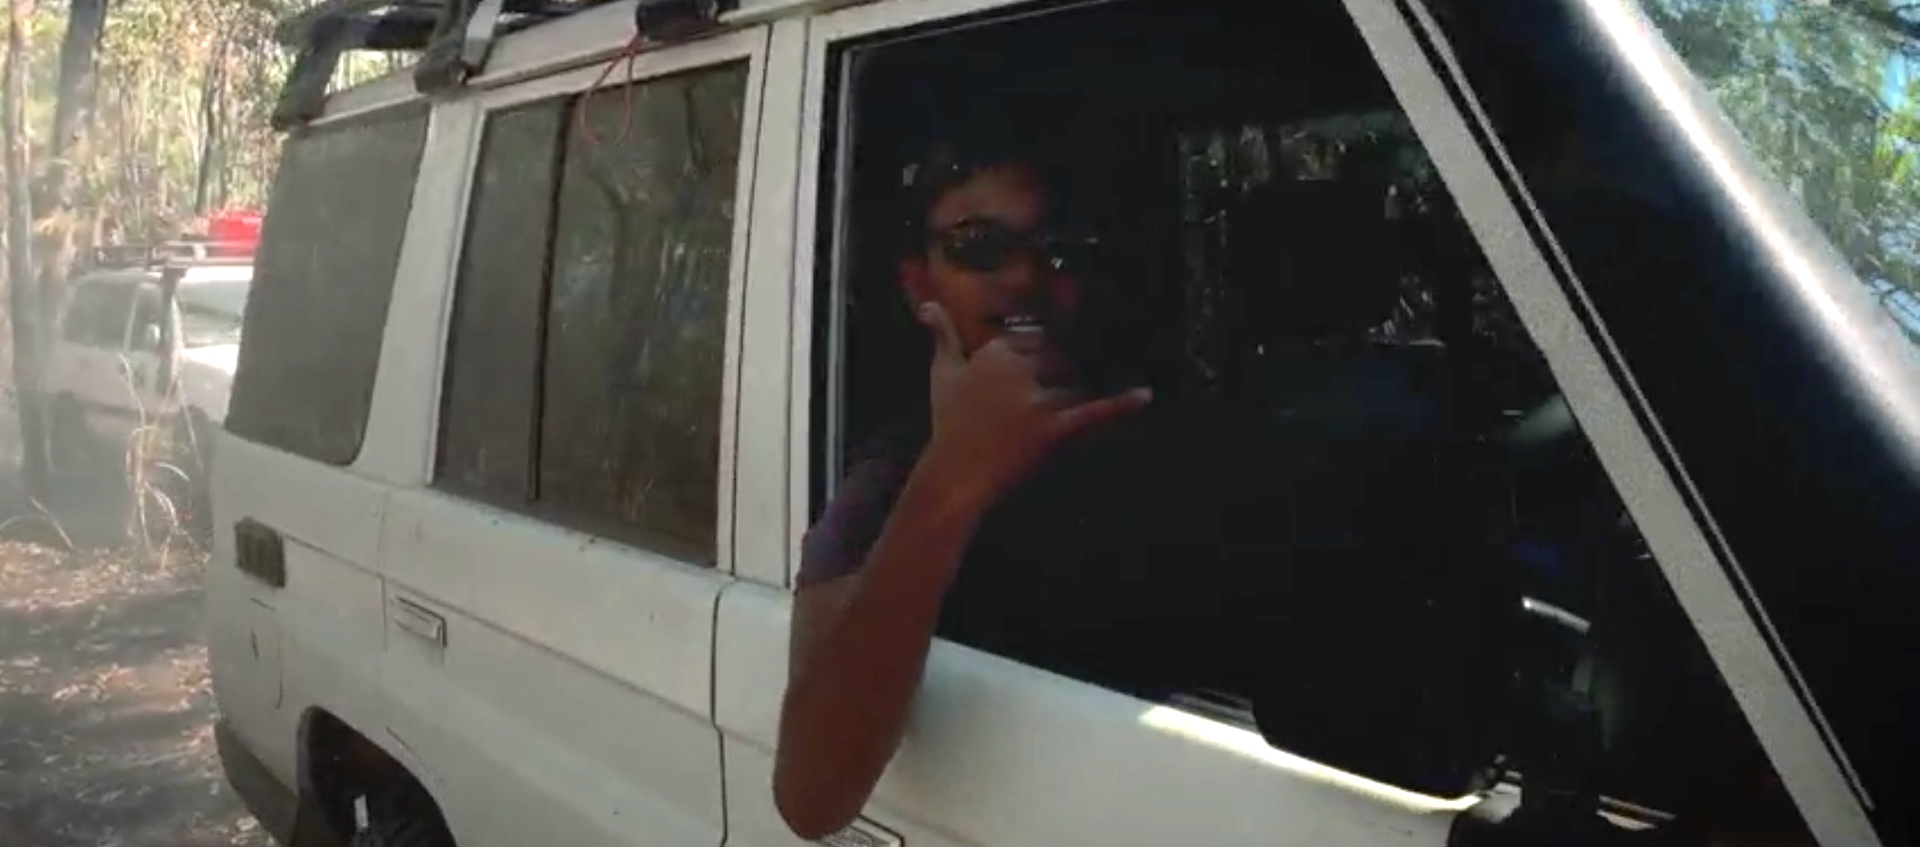 An aboriginal man leans out of the passenger side of a white SUV to make a "hang ten" hand gesture as he drives through an Australian forest. Another white SUV is driving behind him.